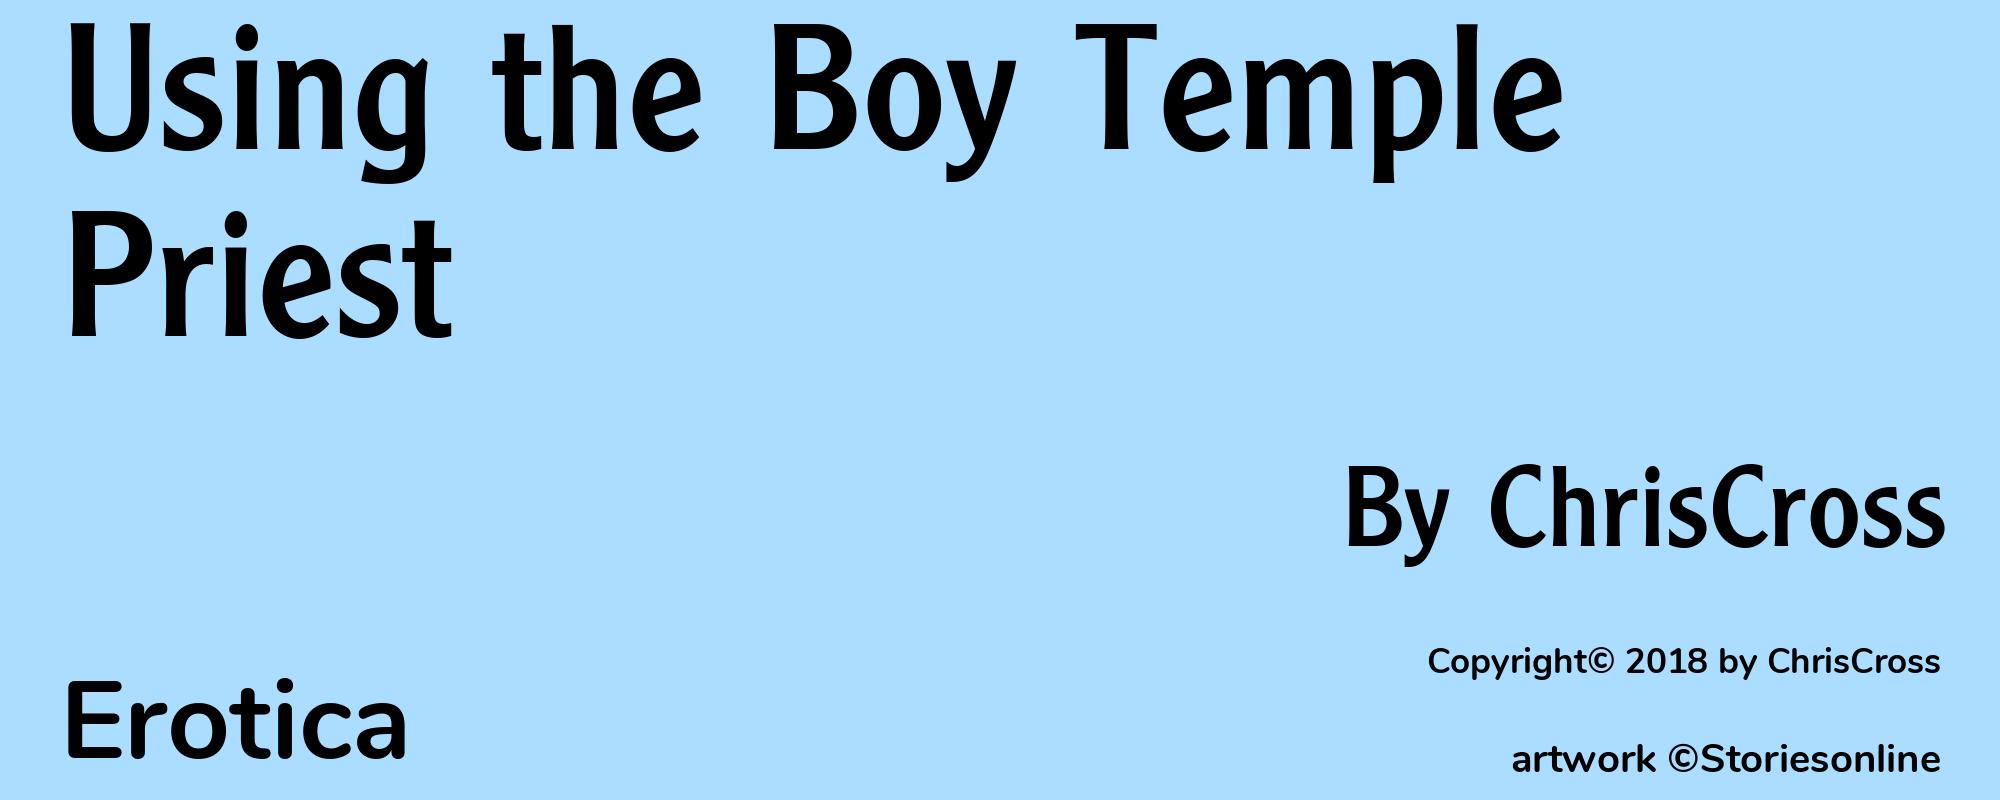 Using the Boy Temple Priest - Cover